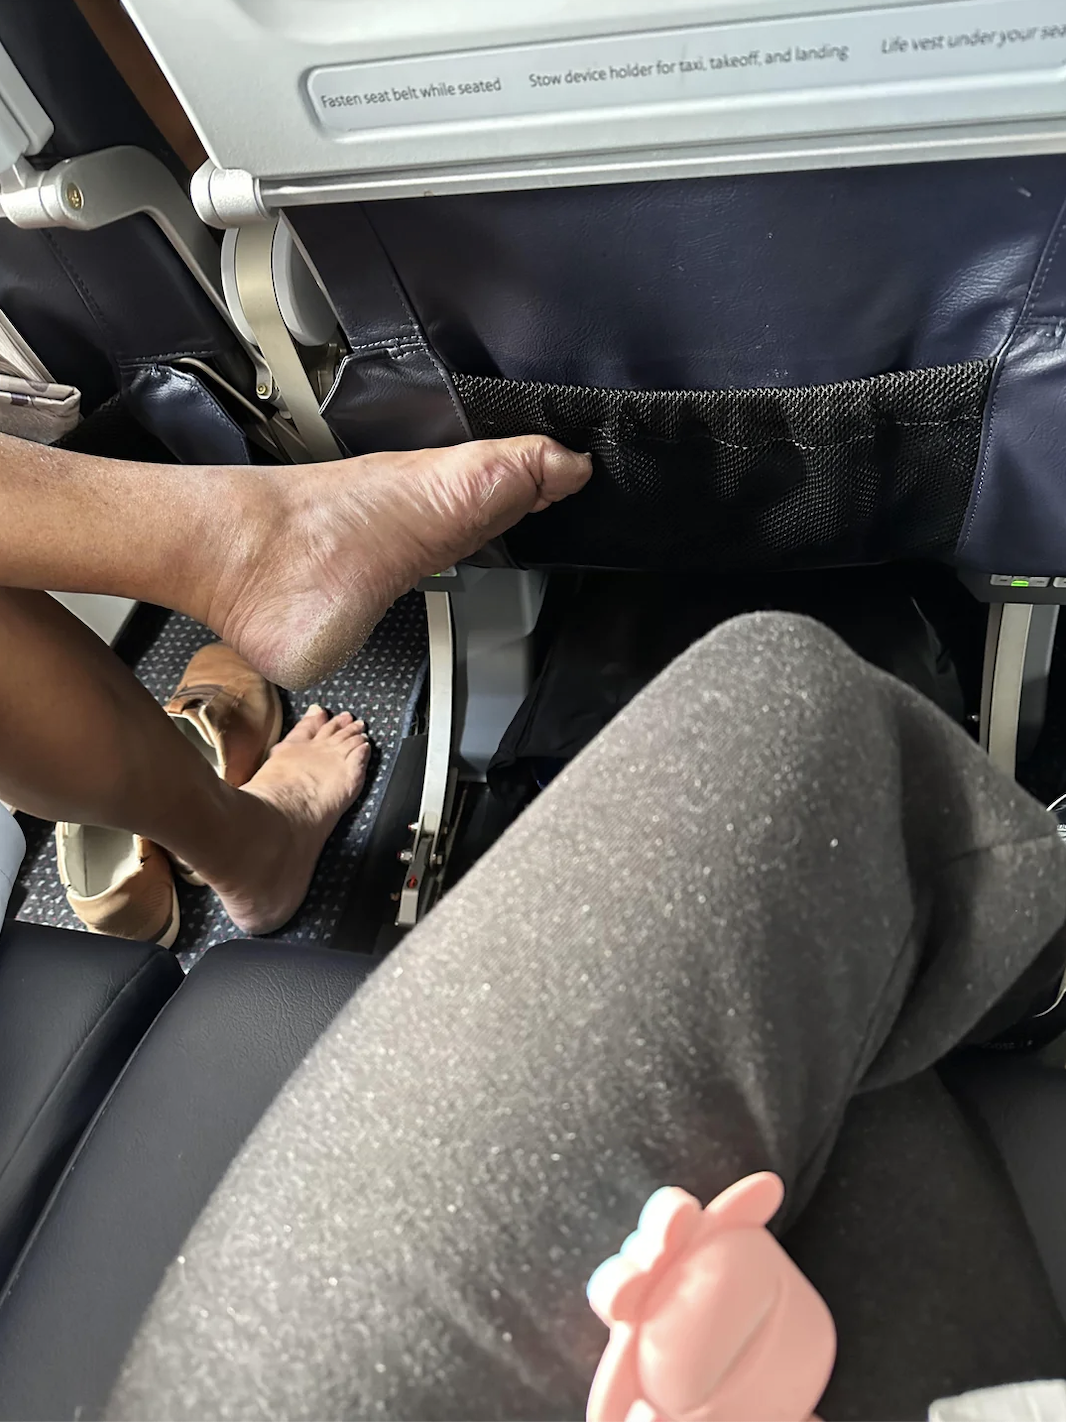 What to do if your neighbor's feet invade your space on an airplane: advice from an etiquette expert